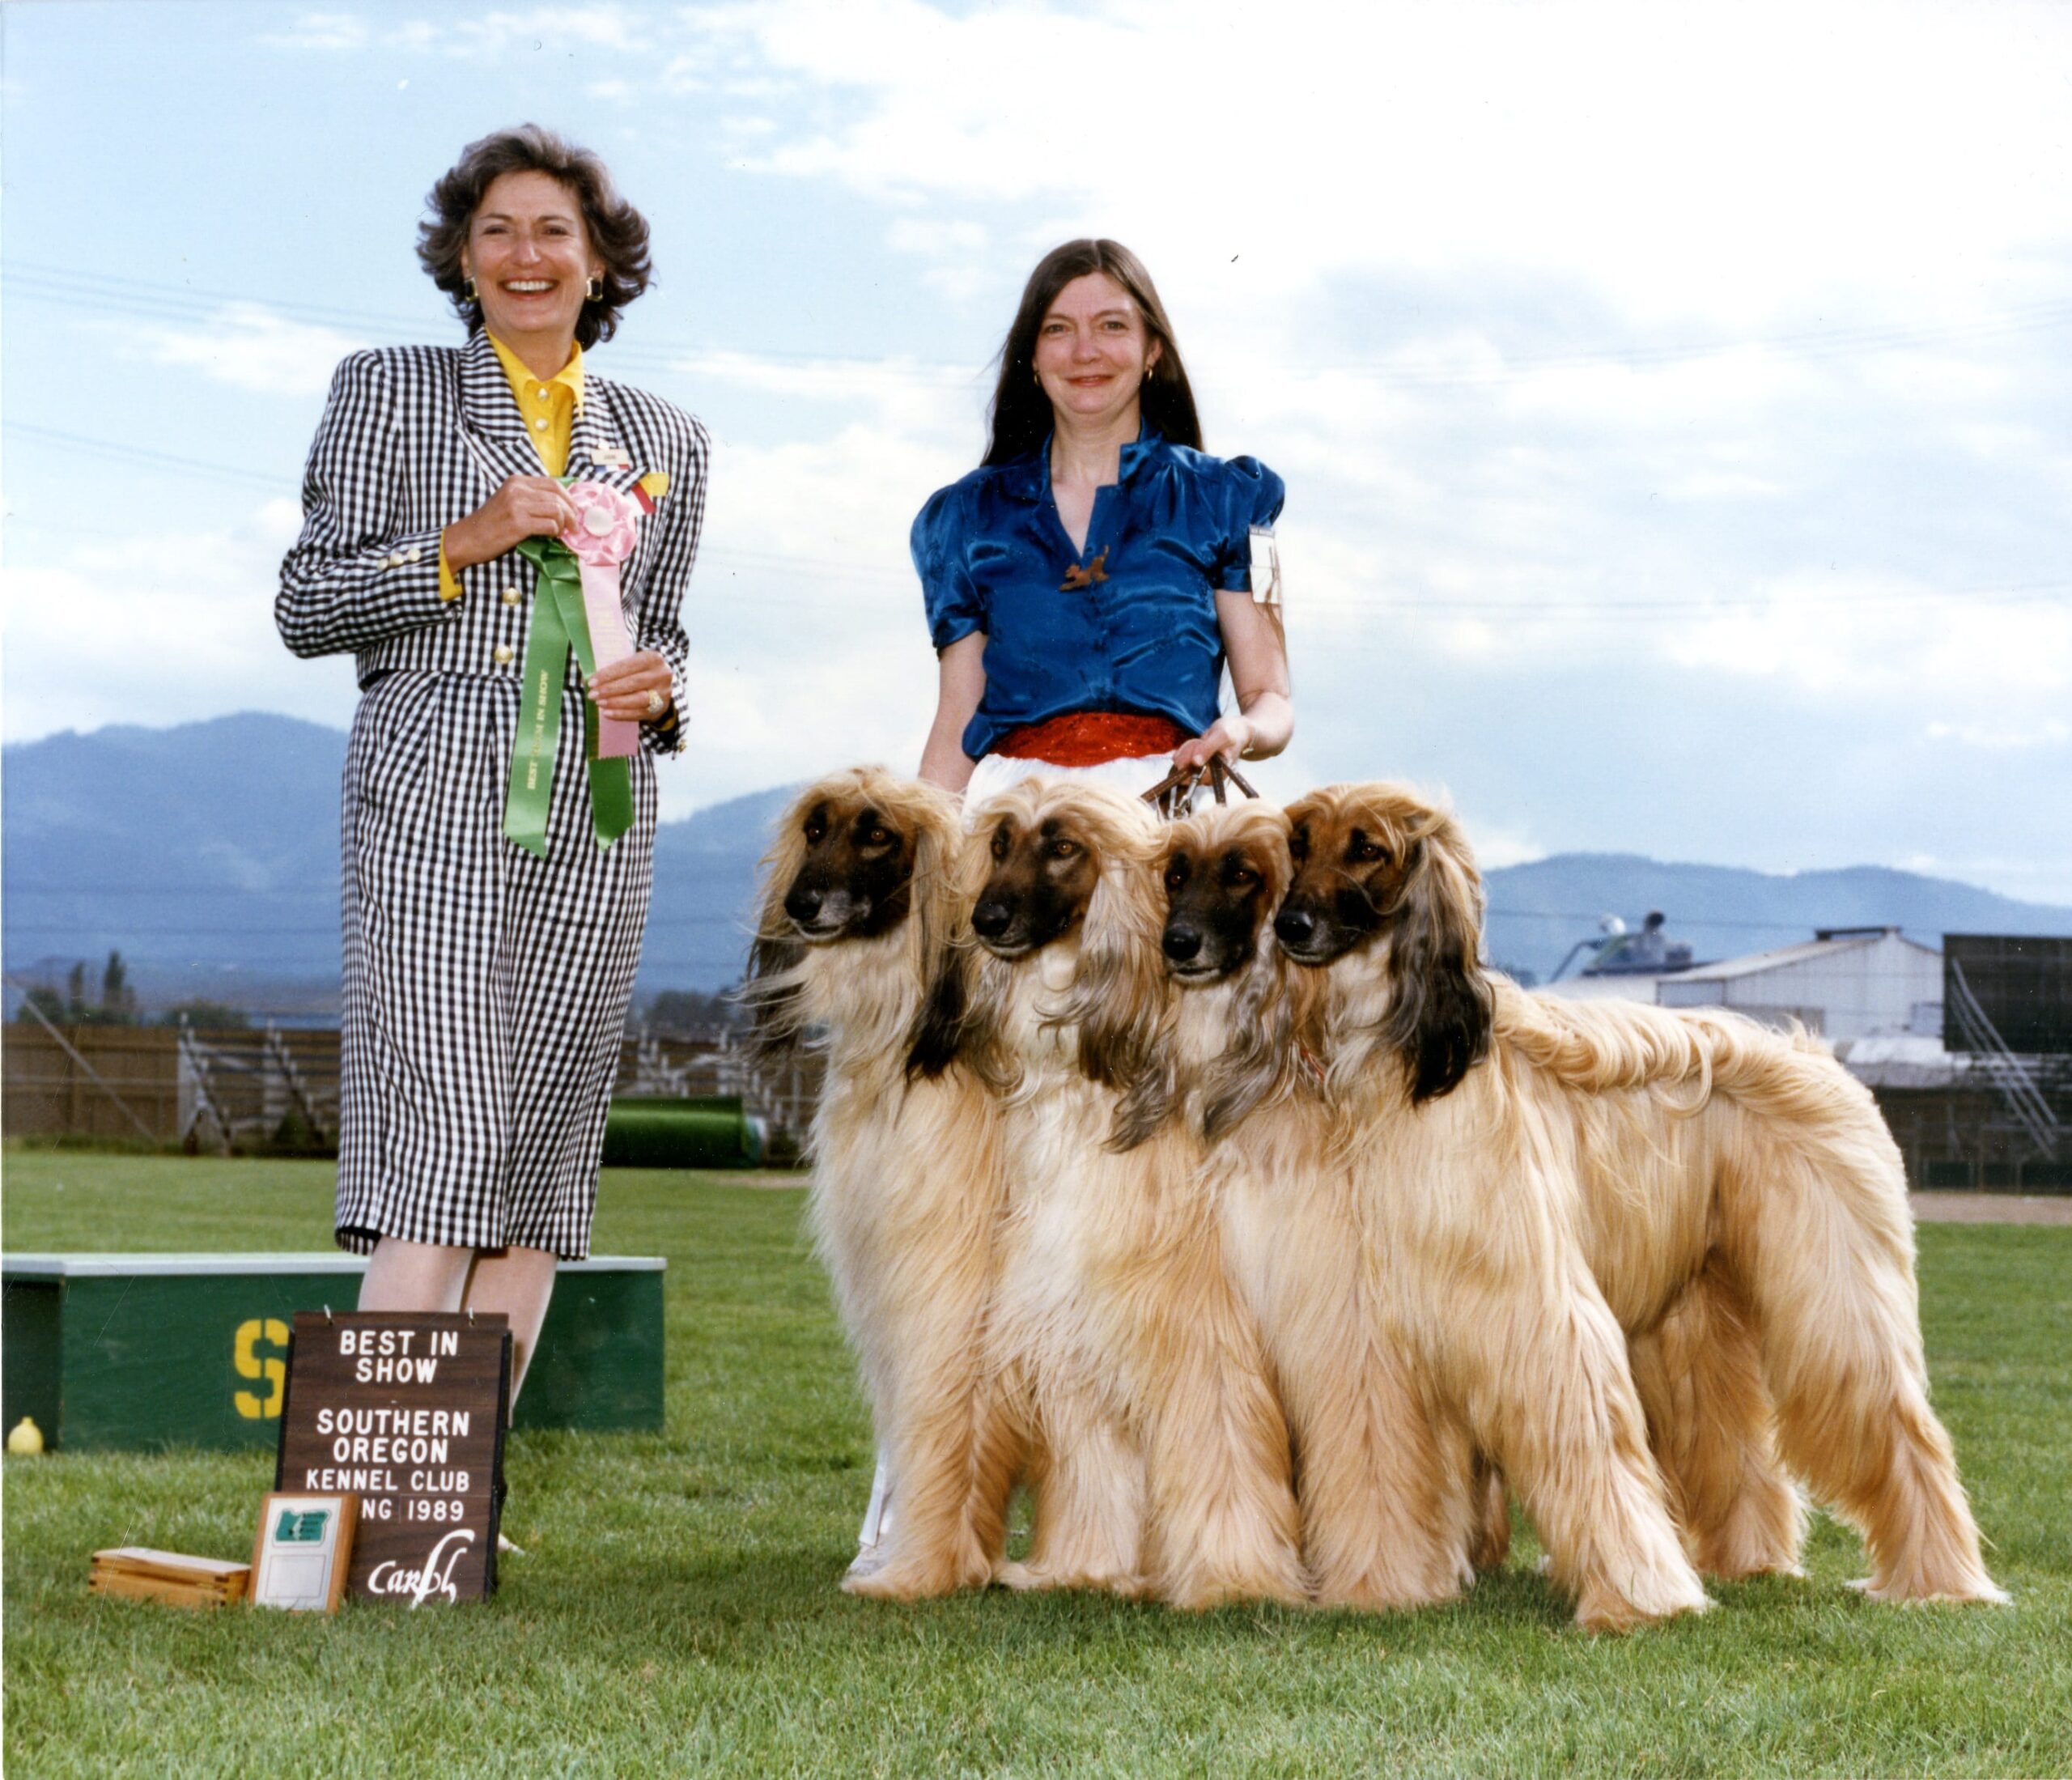 Sheila Grant and her four Afghan hounds are awarded Best in Show at the Southern Oregon Kennel Club dog show in 1989